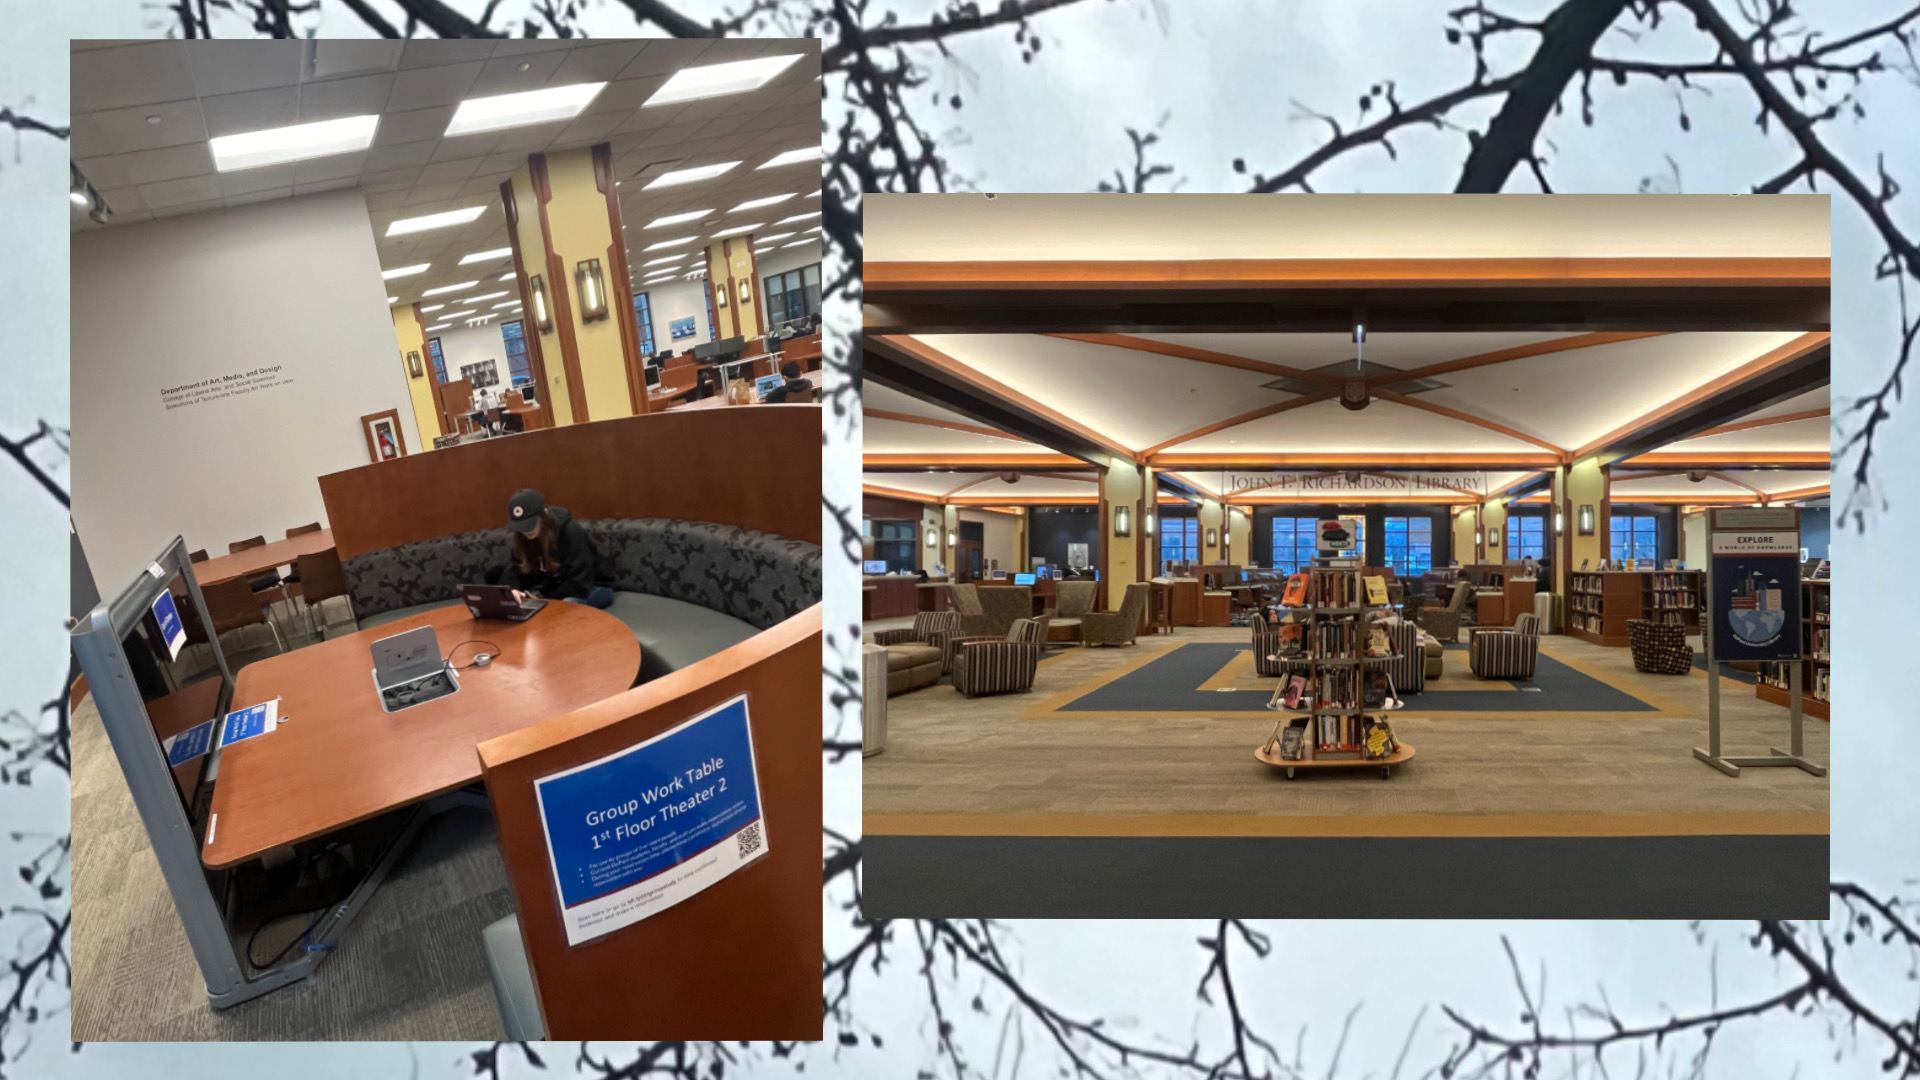 Two images of a building’s interior (Library LPC)